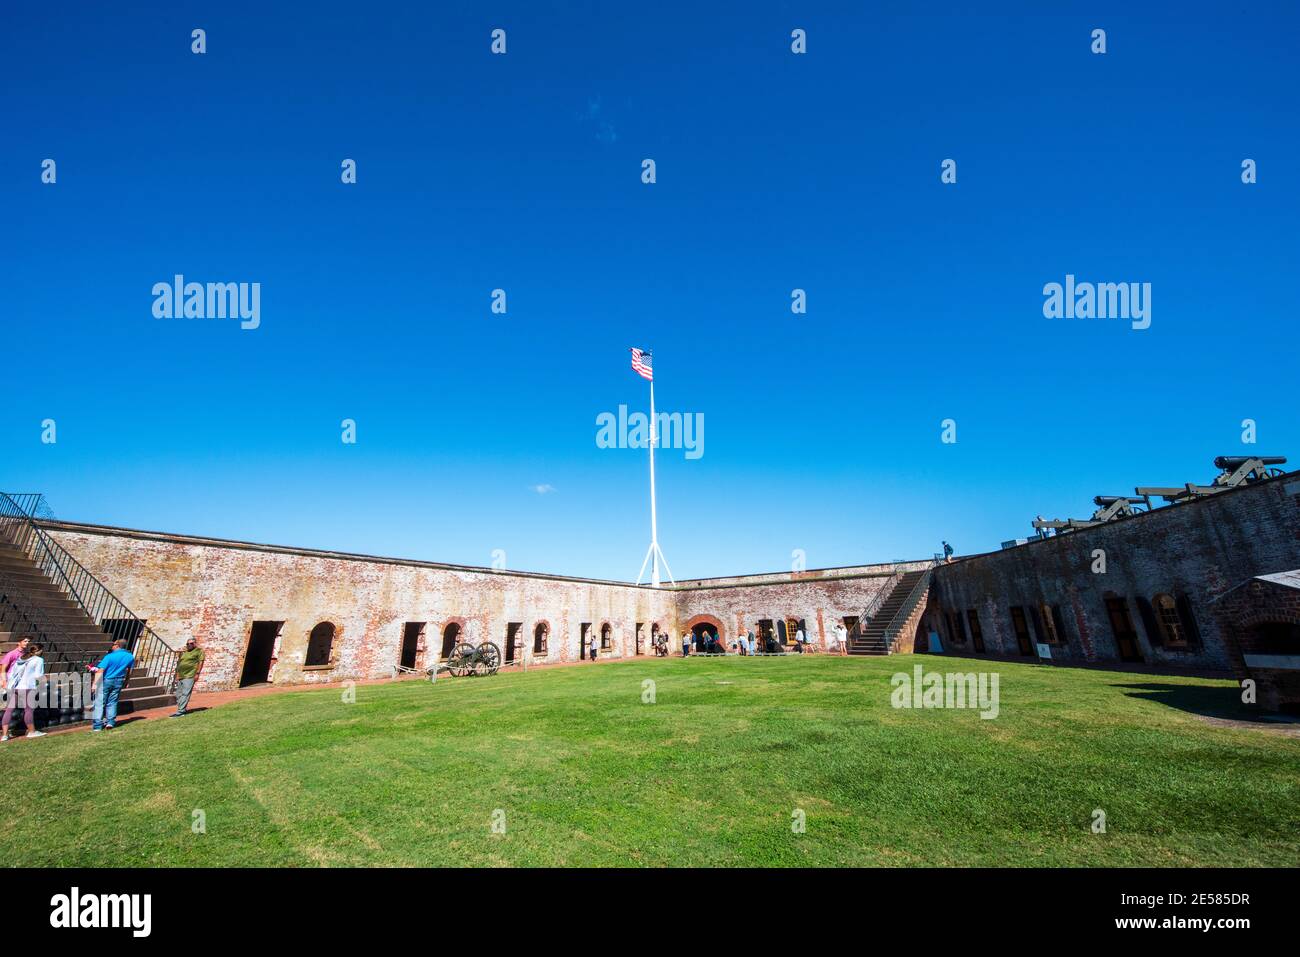 View of the parade ground at Fort Macon State Park in Atlantic Beach, NC. Fort Macon was constructed after the War of 1812 to defend Beaufort Harbor. Stock Photo